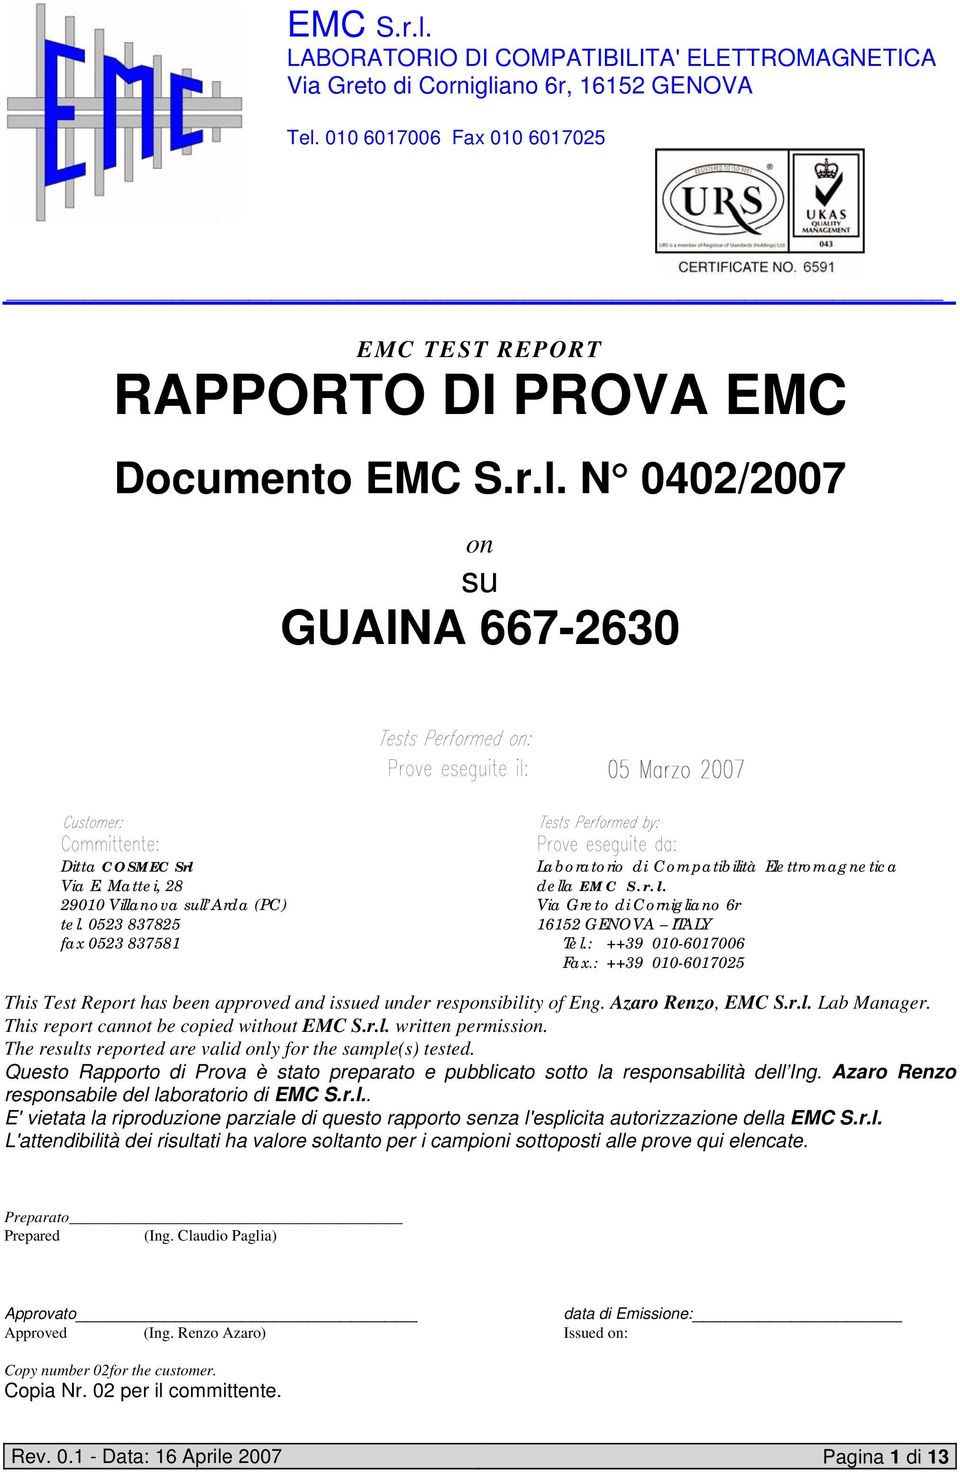 : ++39 010-6017025 This Test Report has been approved and issued under responsibility of Eng. Azaro Renzo, EMC S.r.l. Lab Manager. This report cannot be copied without EMC S.r.l. written permission.